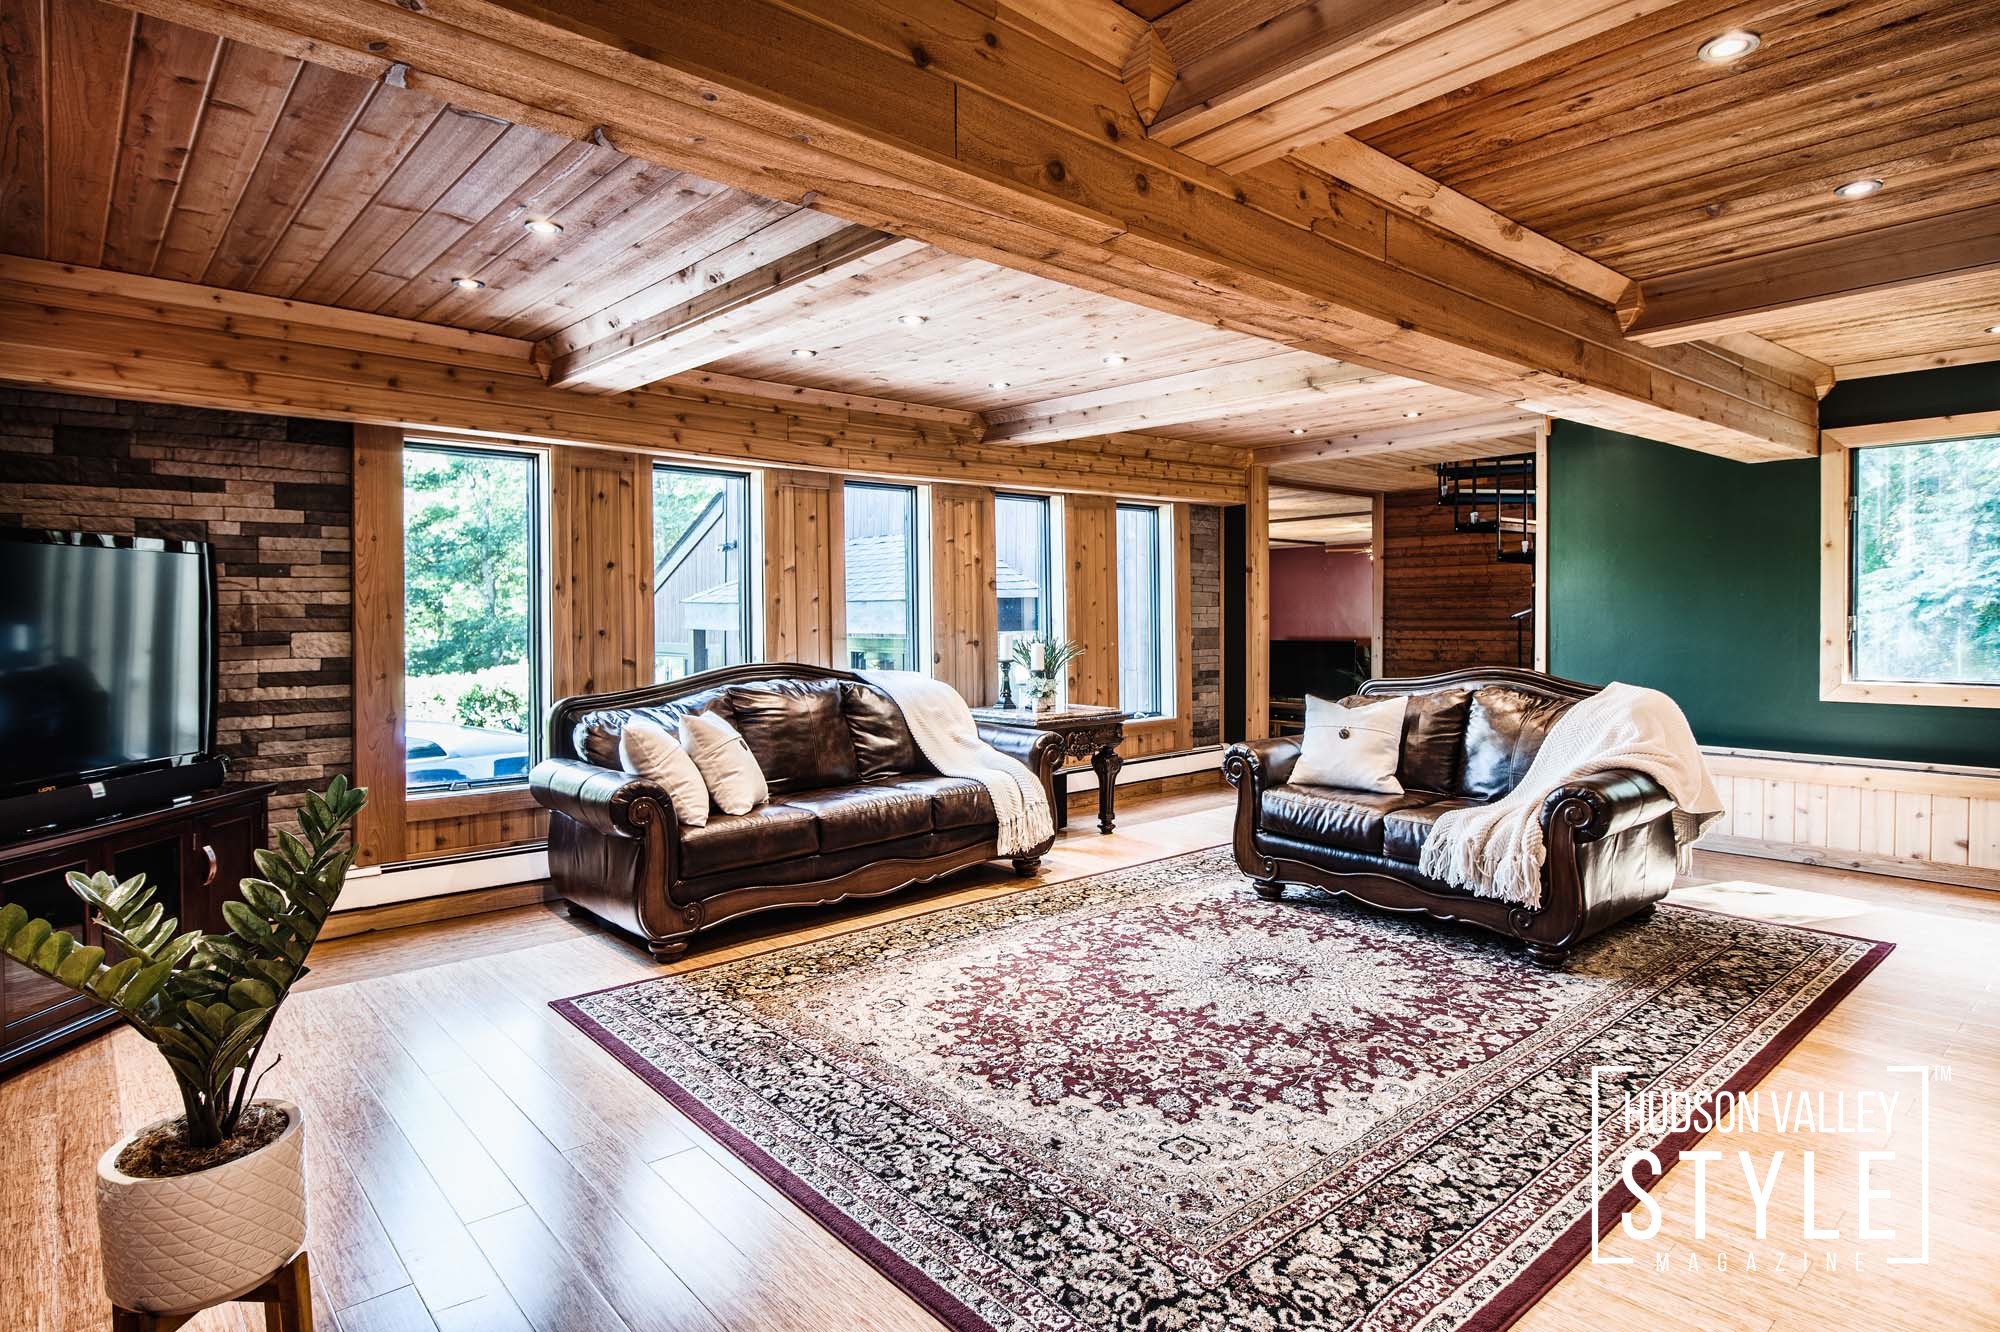 Home or Vacation Getaway in the Hudson Valley: Either Way The Hudson Villa is an Absolute Perfection by Realtor Miranda Weinberger